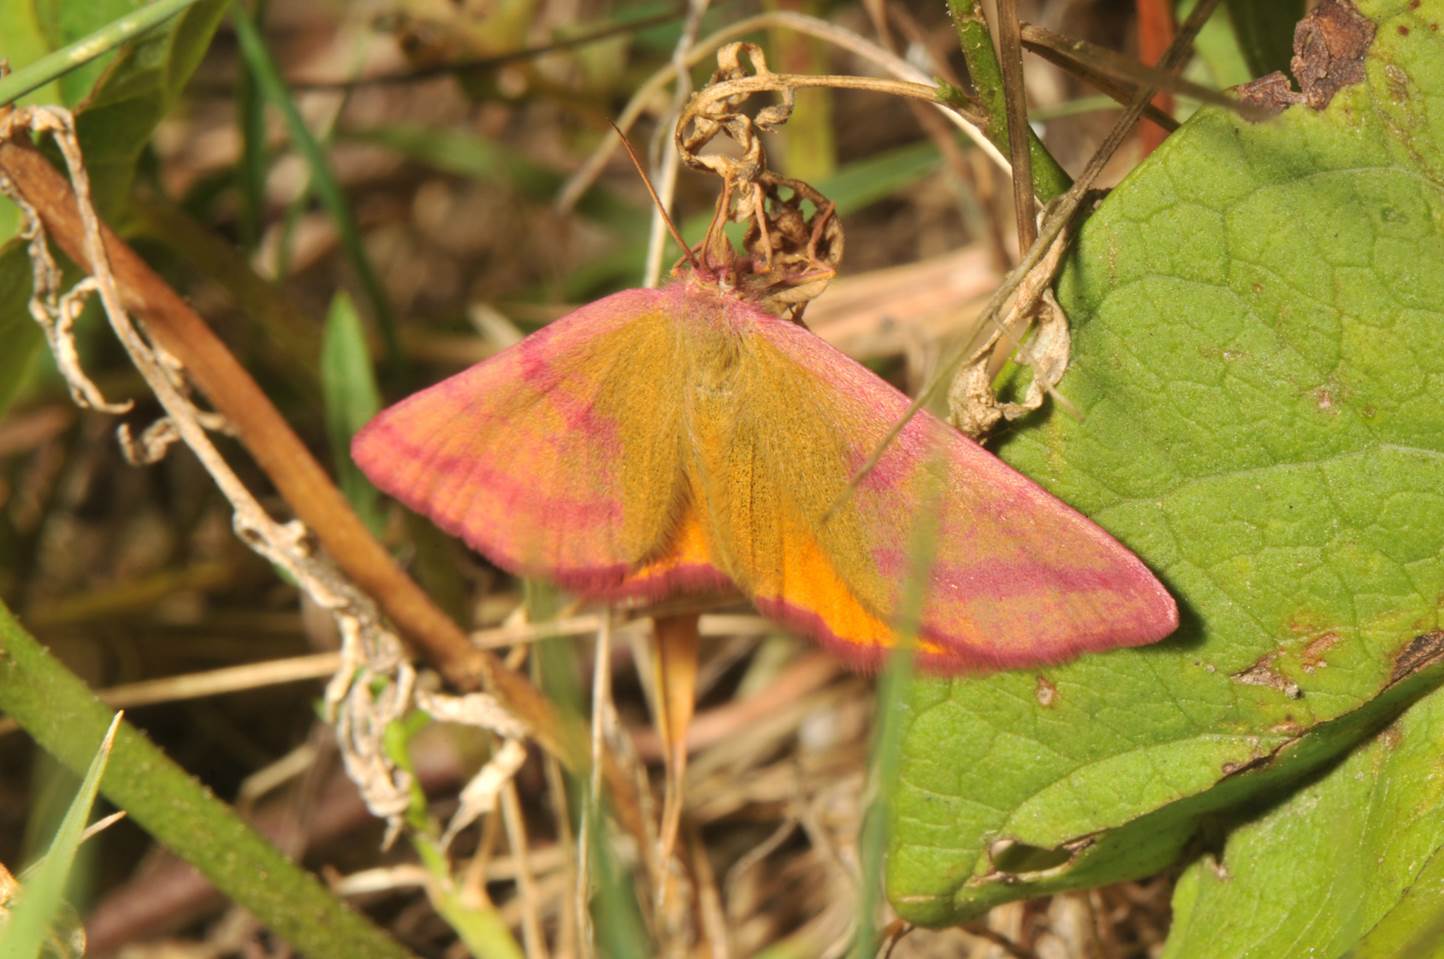 A pink and yellow moth on a leaf

Description automatically generated